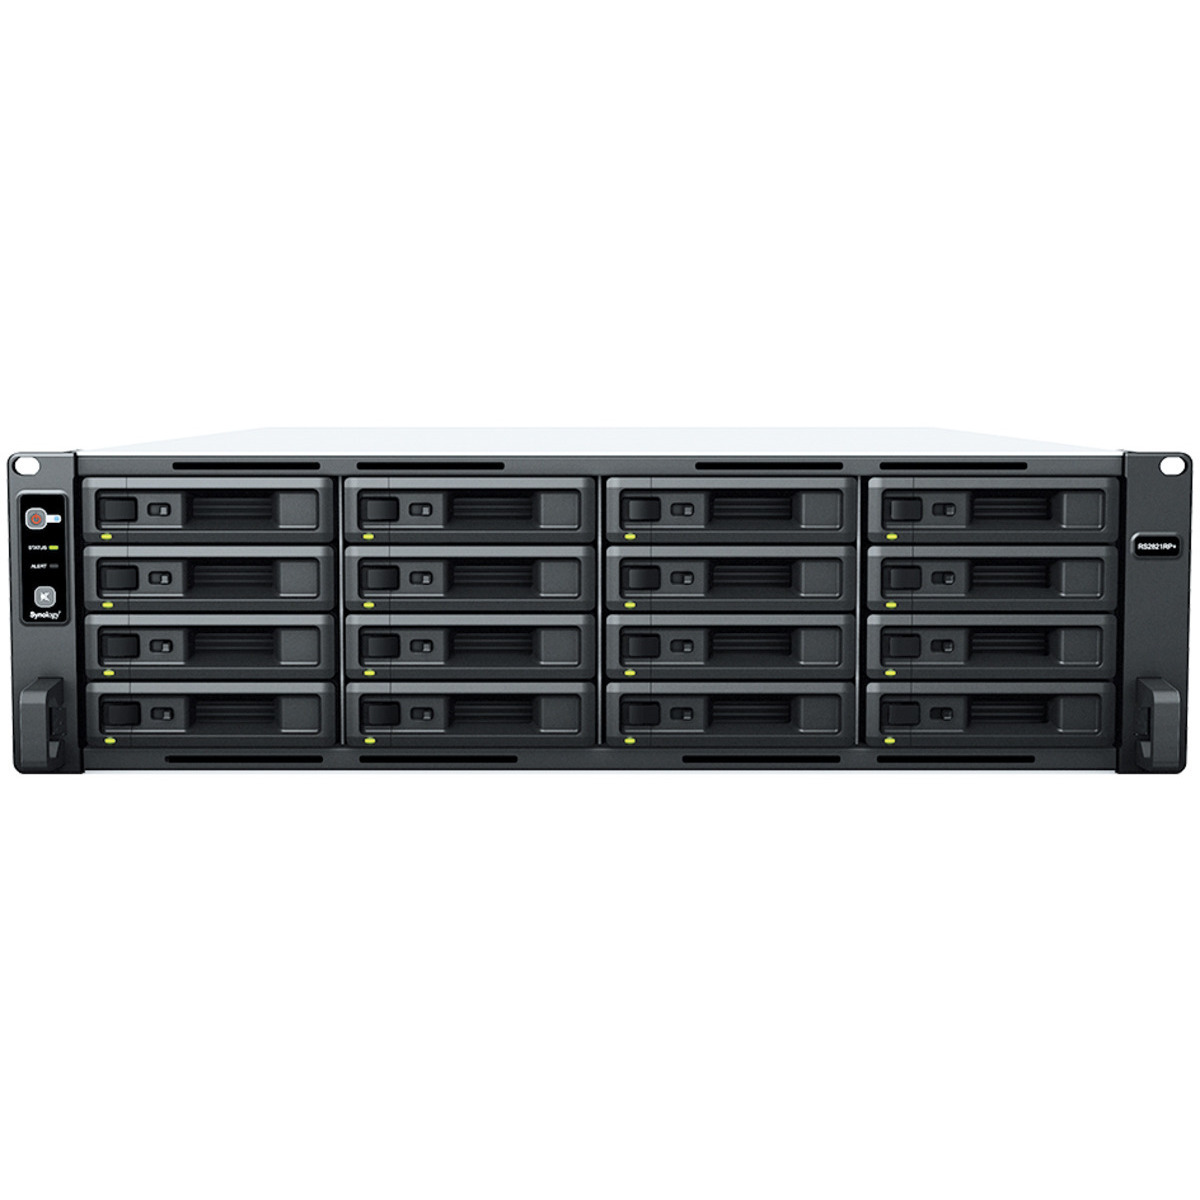 buy $5575 Synology RackStation RS2821RP+ 16tb RackMount NAS - Network Attached Storage Device 16x1000gb Samsung 870 QVO MZ-77Q1T0 2.5 SATA 6Gb/s SSD CONSUMER Class Drives Installed - Burn-In Tested - nas headquarters buy network attached storage server device das new raid-5 free shipping usa RackStation RS2821RP+